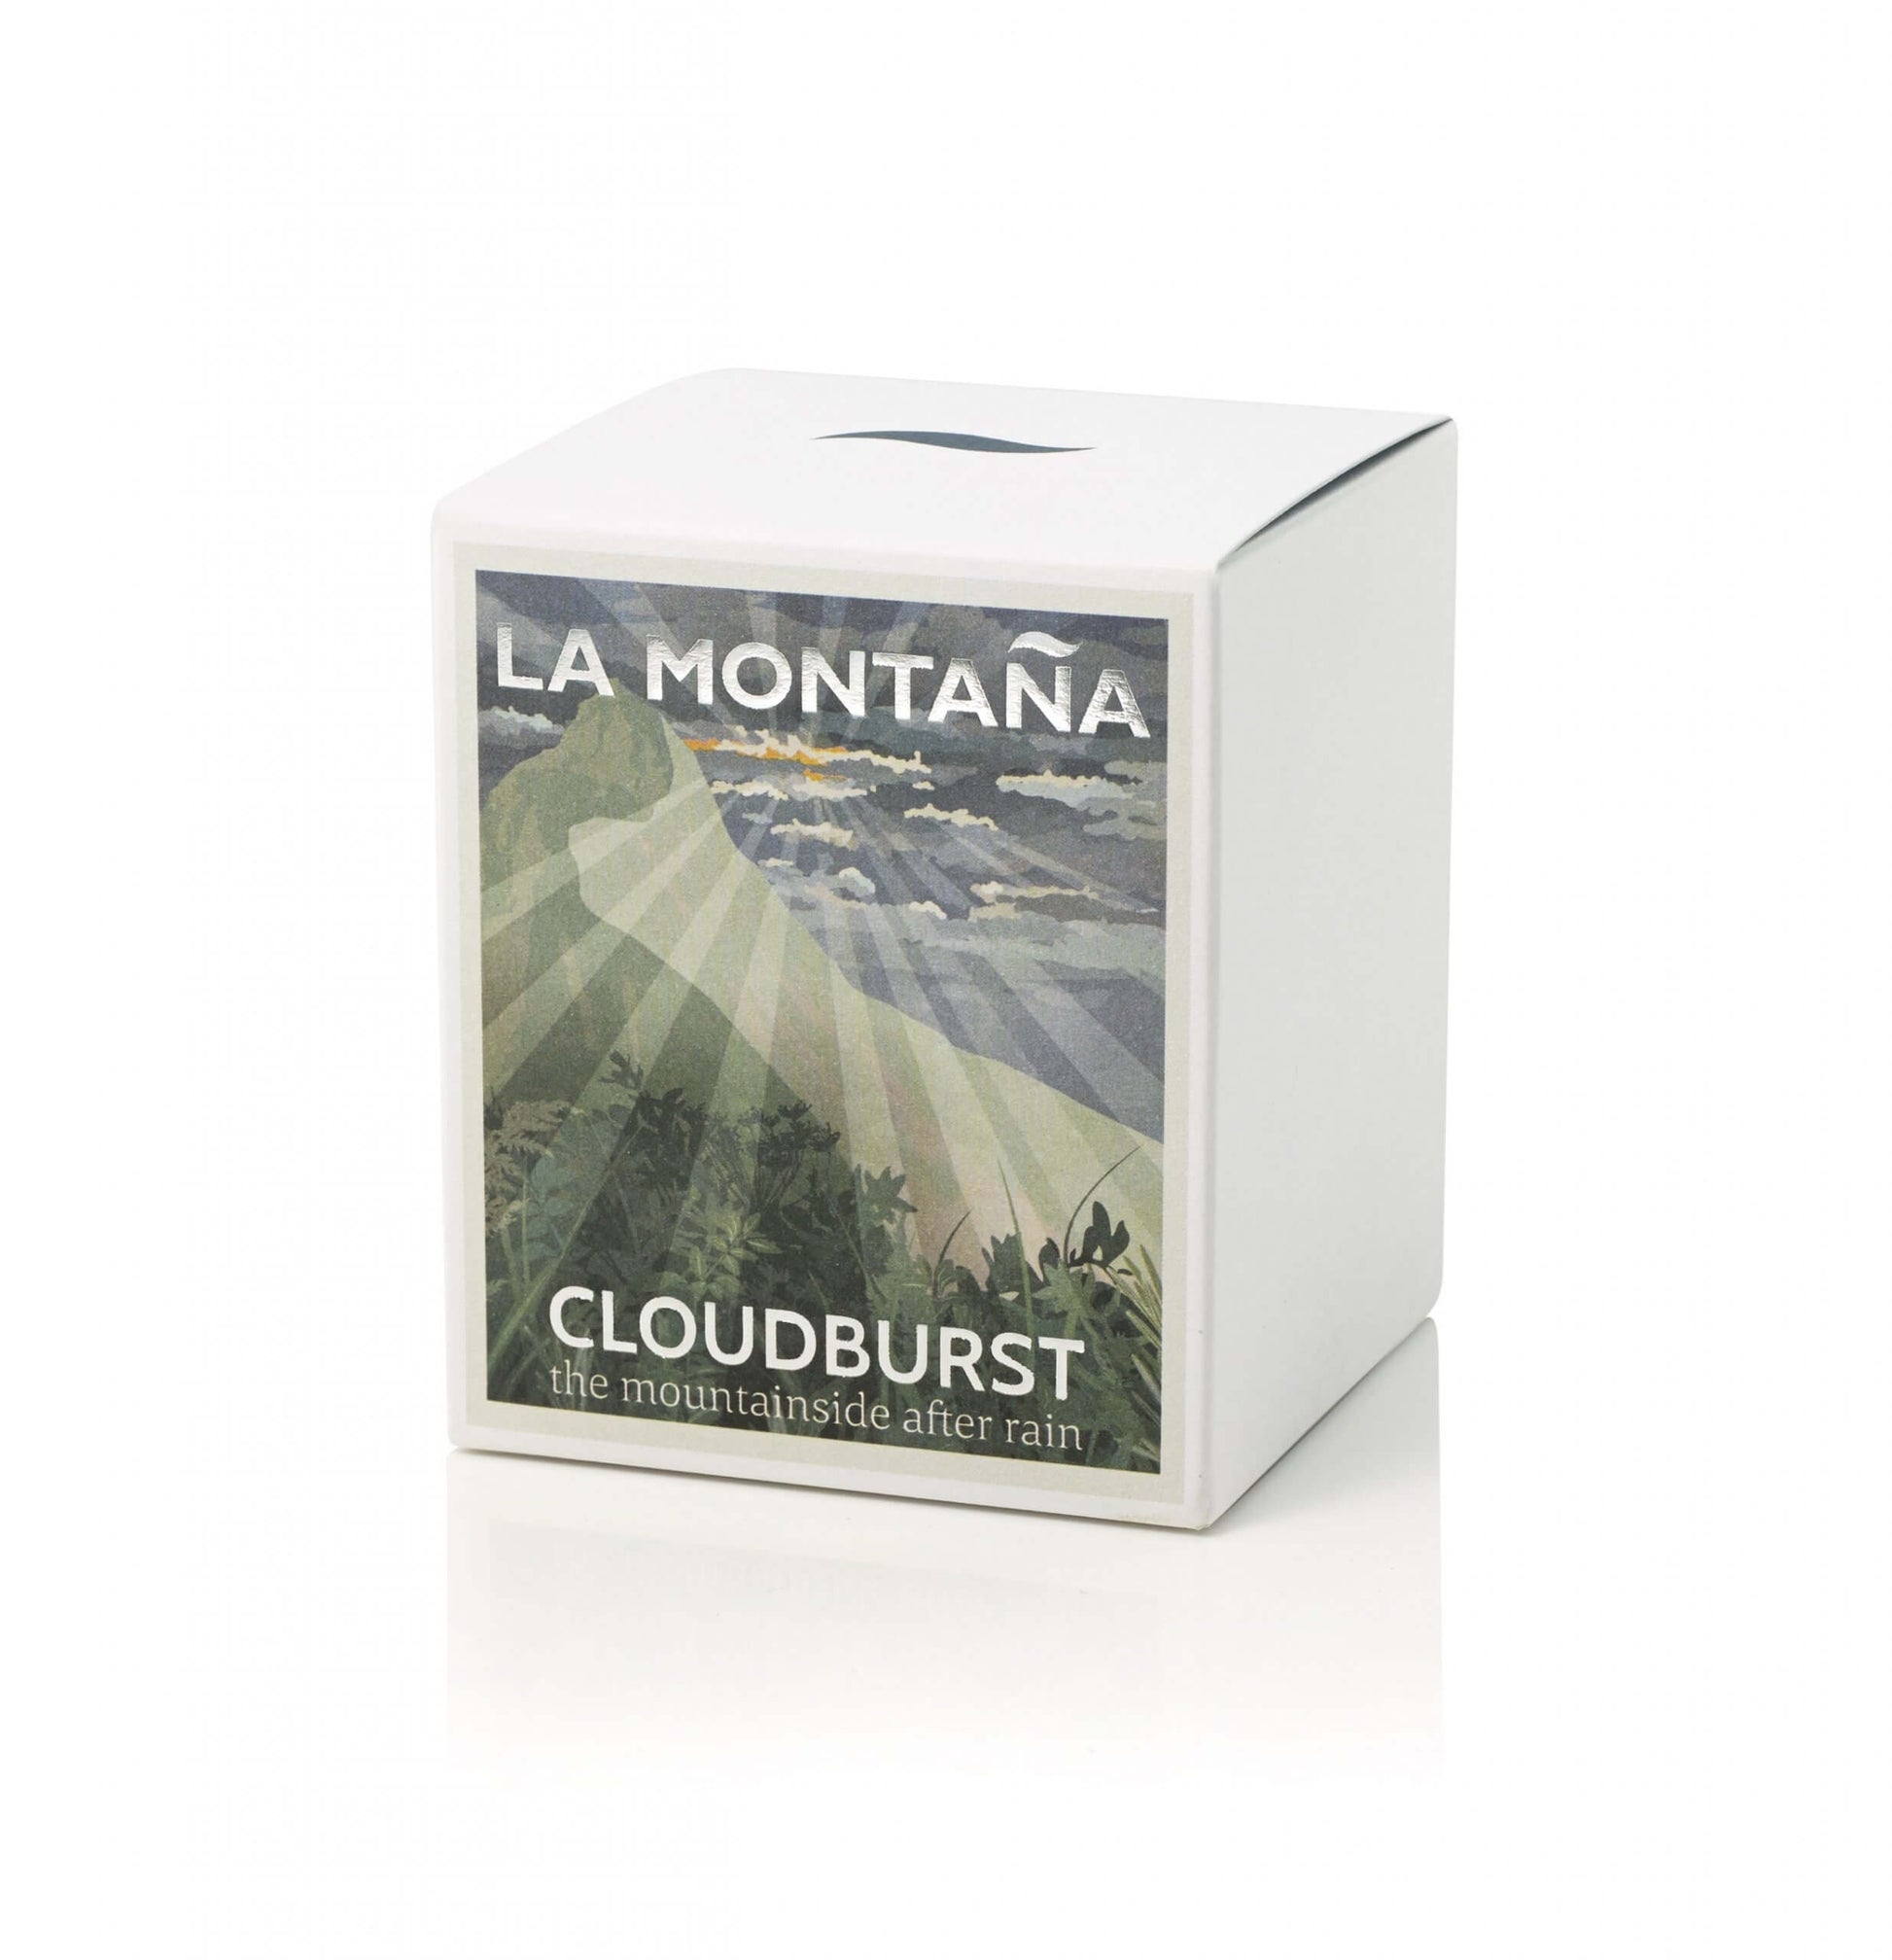 La Montaña Cloudburst Scented Candle - Osmology Scented Candles & Home Fragrance